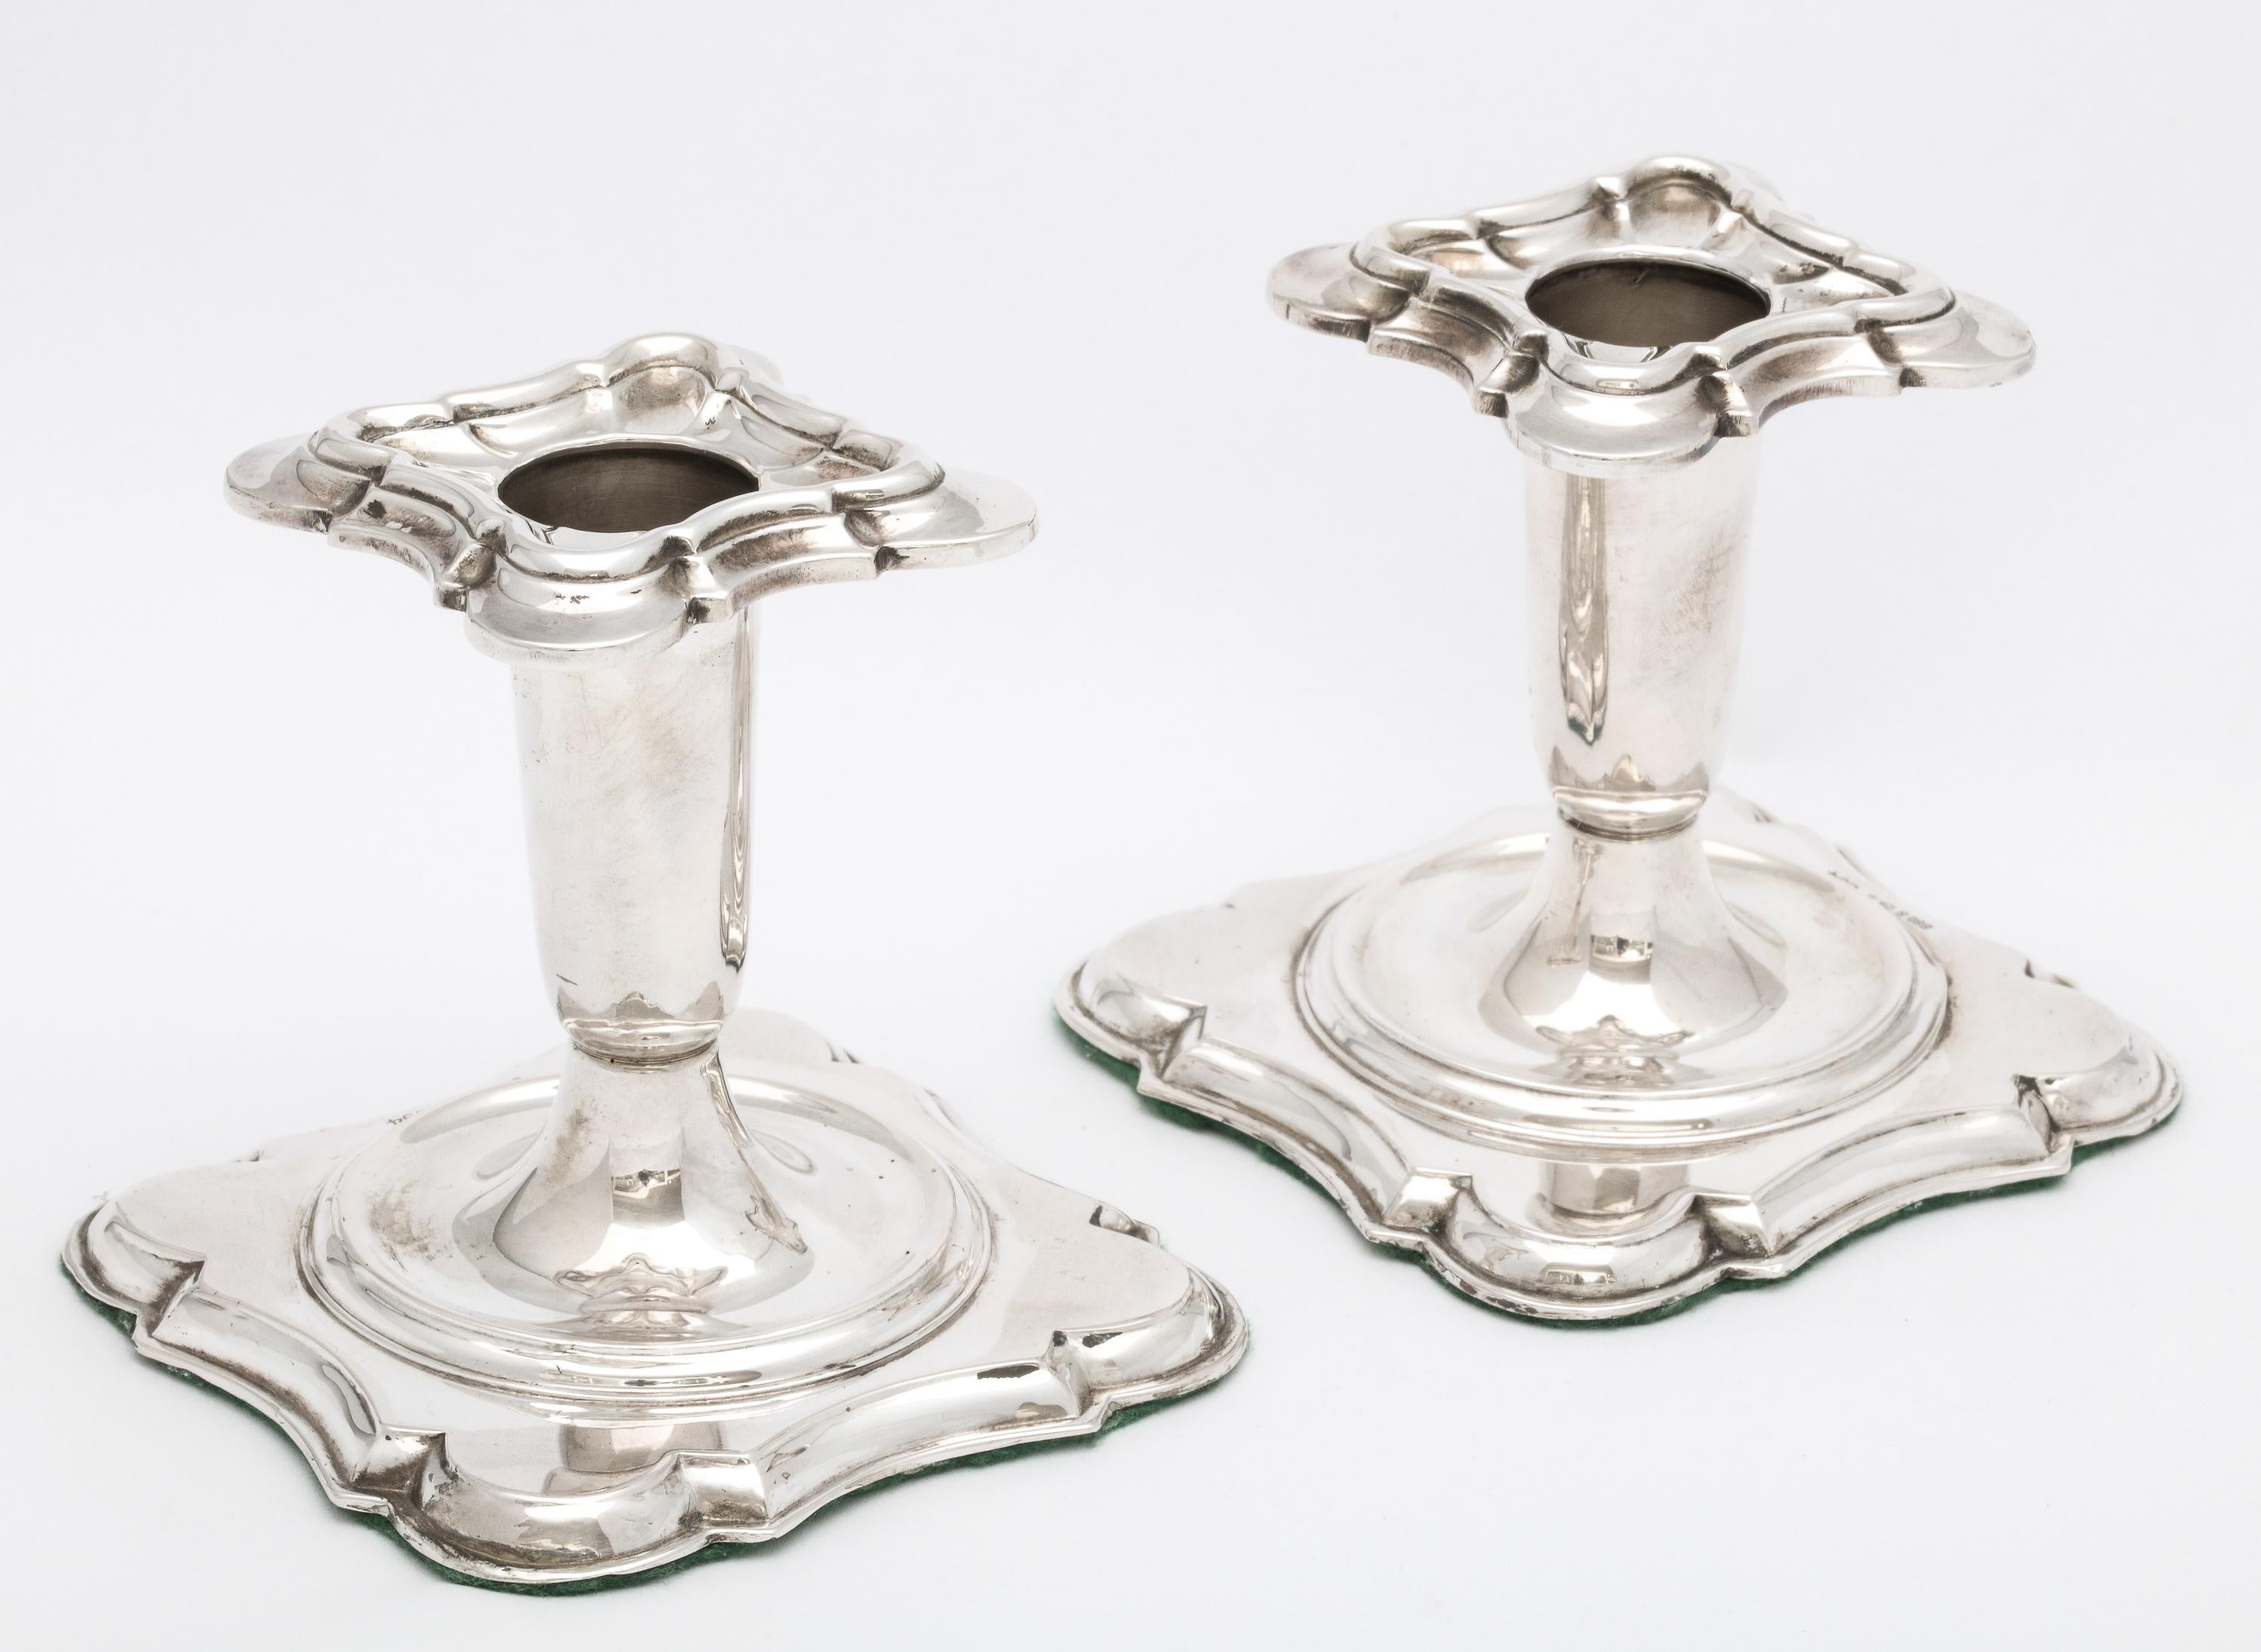 Edwardian pair of Continental silver(.830) candlesticks, Bergen, Norway, Ca. 1910, Theodor Olsens EFTF - maker. Each candlestick measures over 3 1/2 inches high x 3 1/2 inches deep (at deepest point) x 3 1/2 inches wide (at widest point). Each